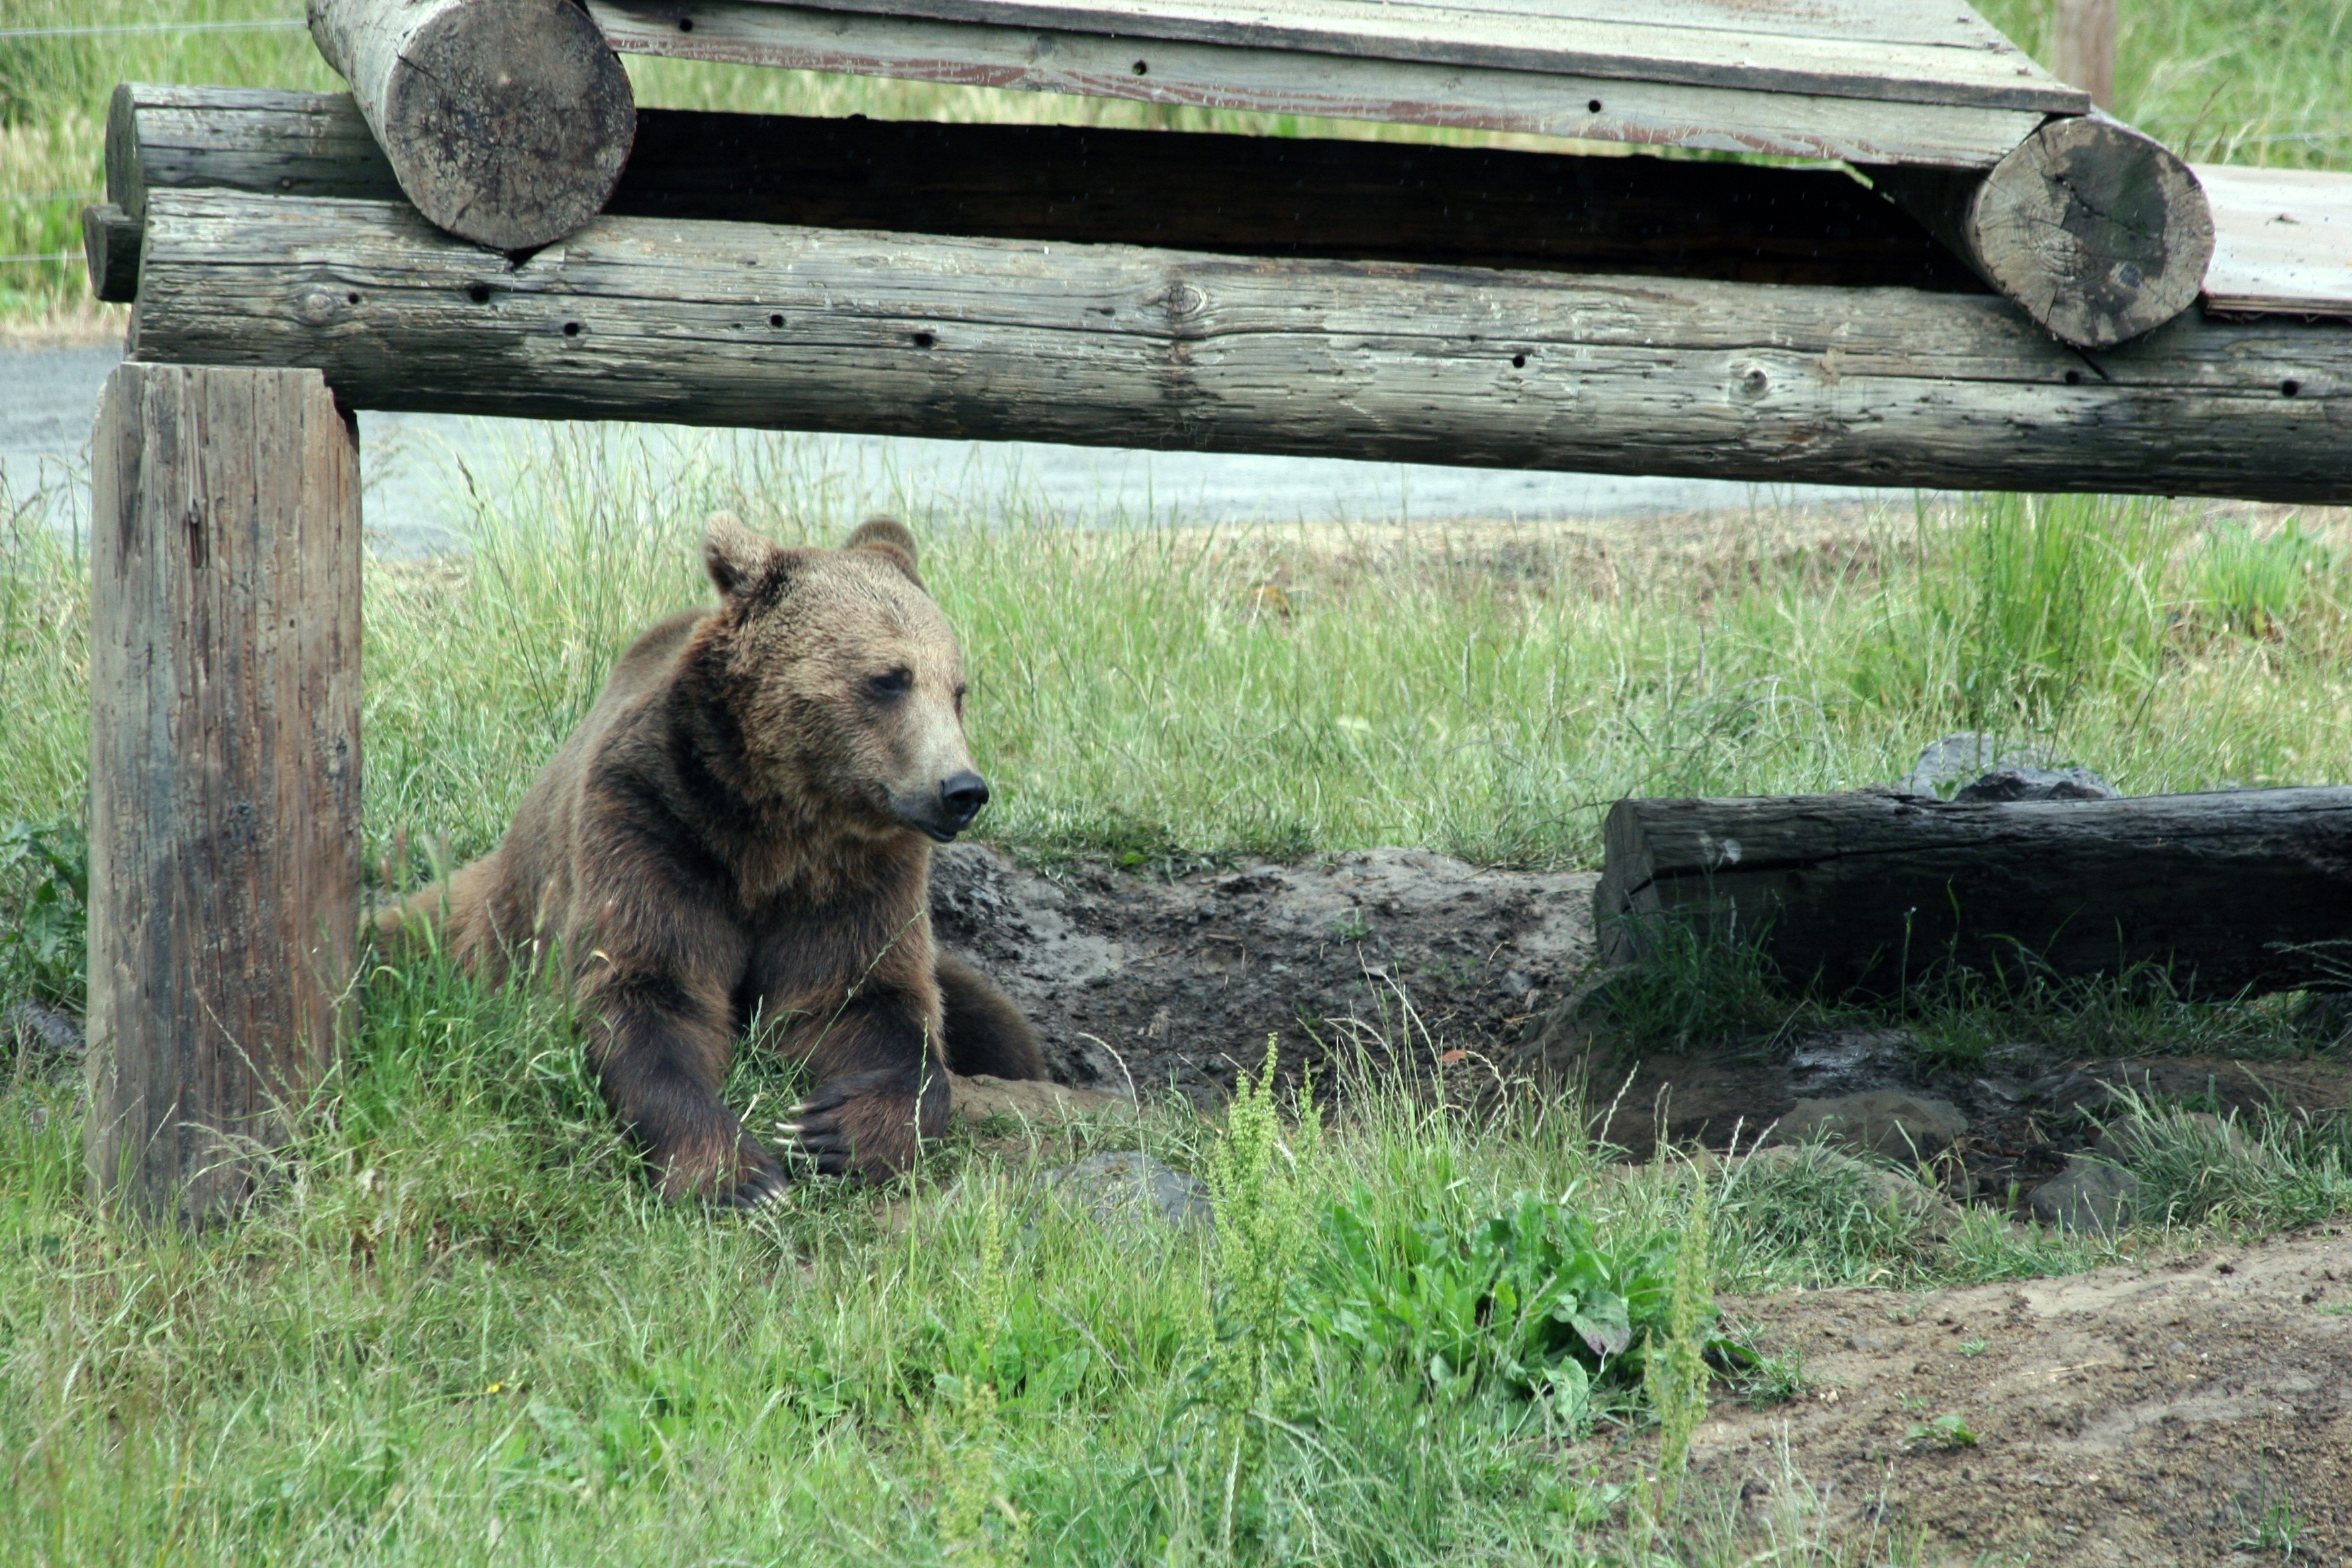 brown grizzly bear